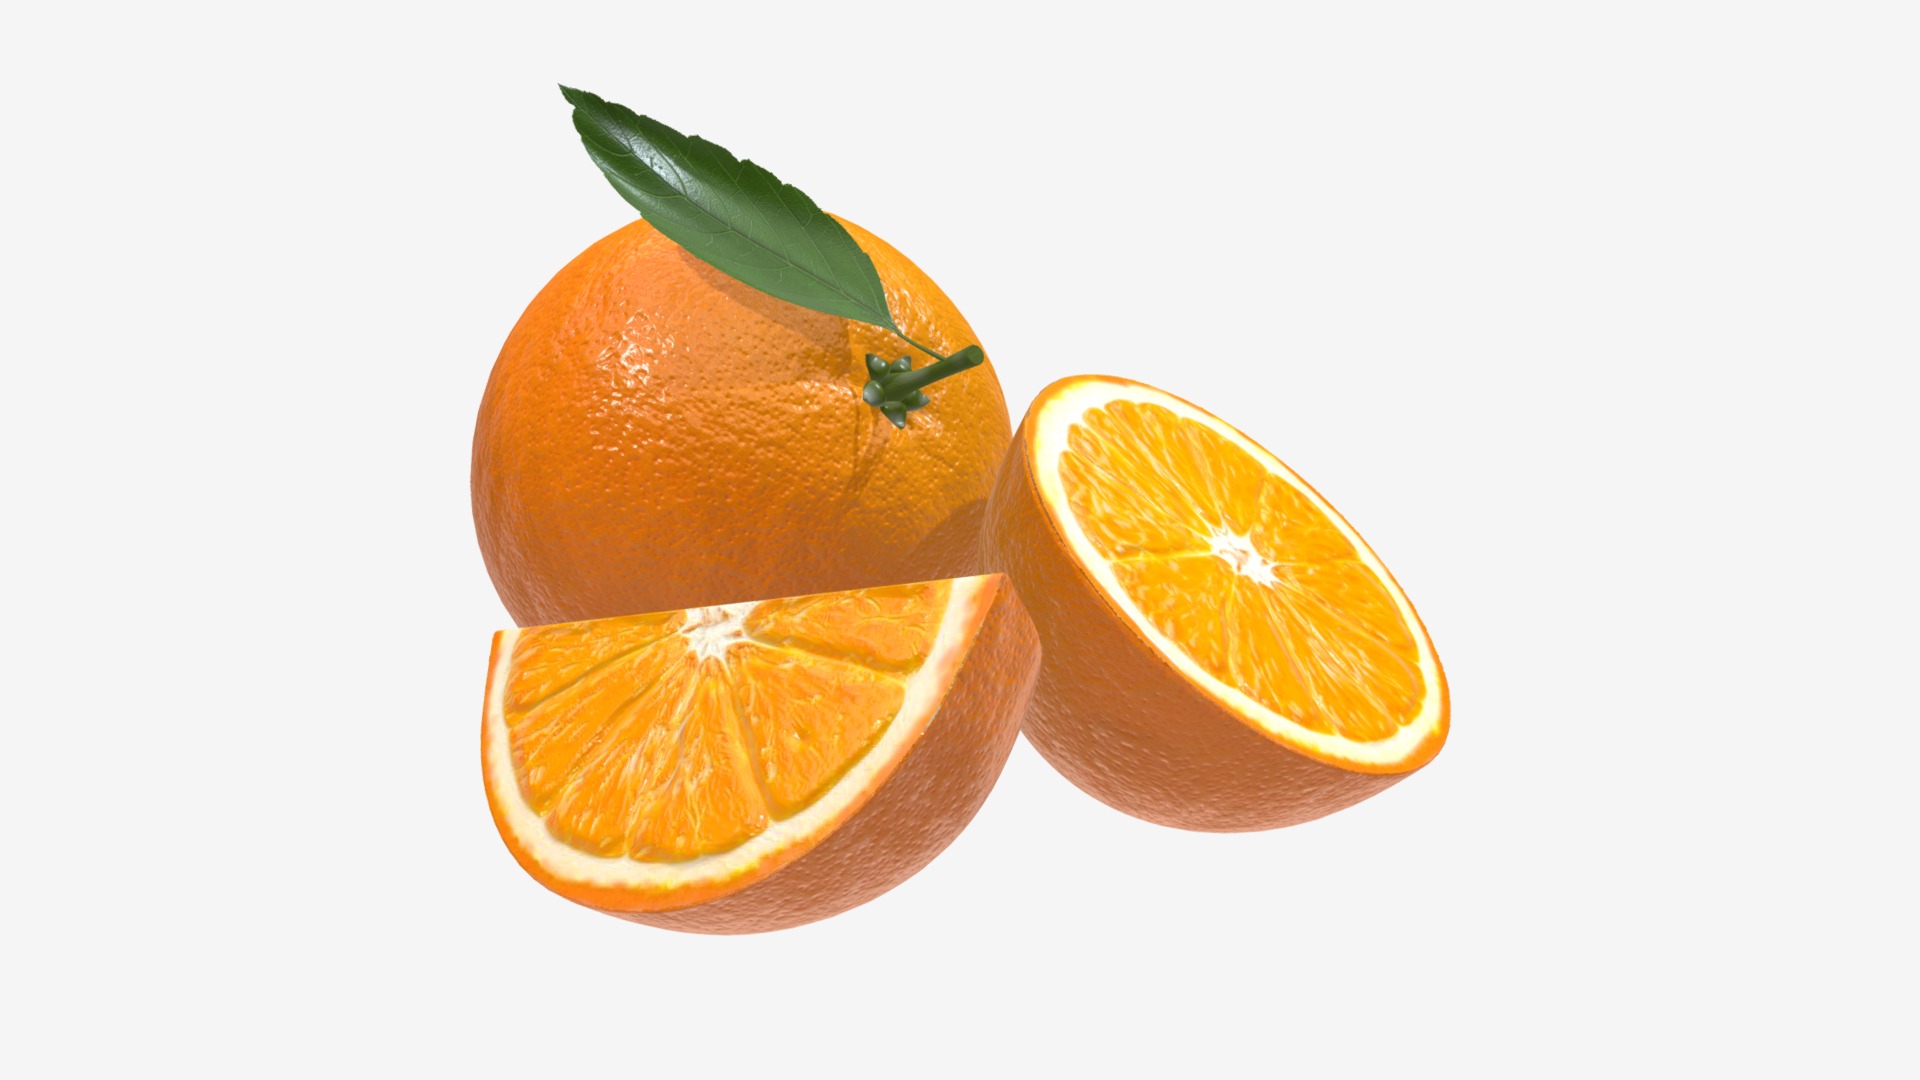 3D model Orange composition - This is a 3D model of the Orange composition. The 3D model is about a couple oranges with a green stem.